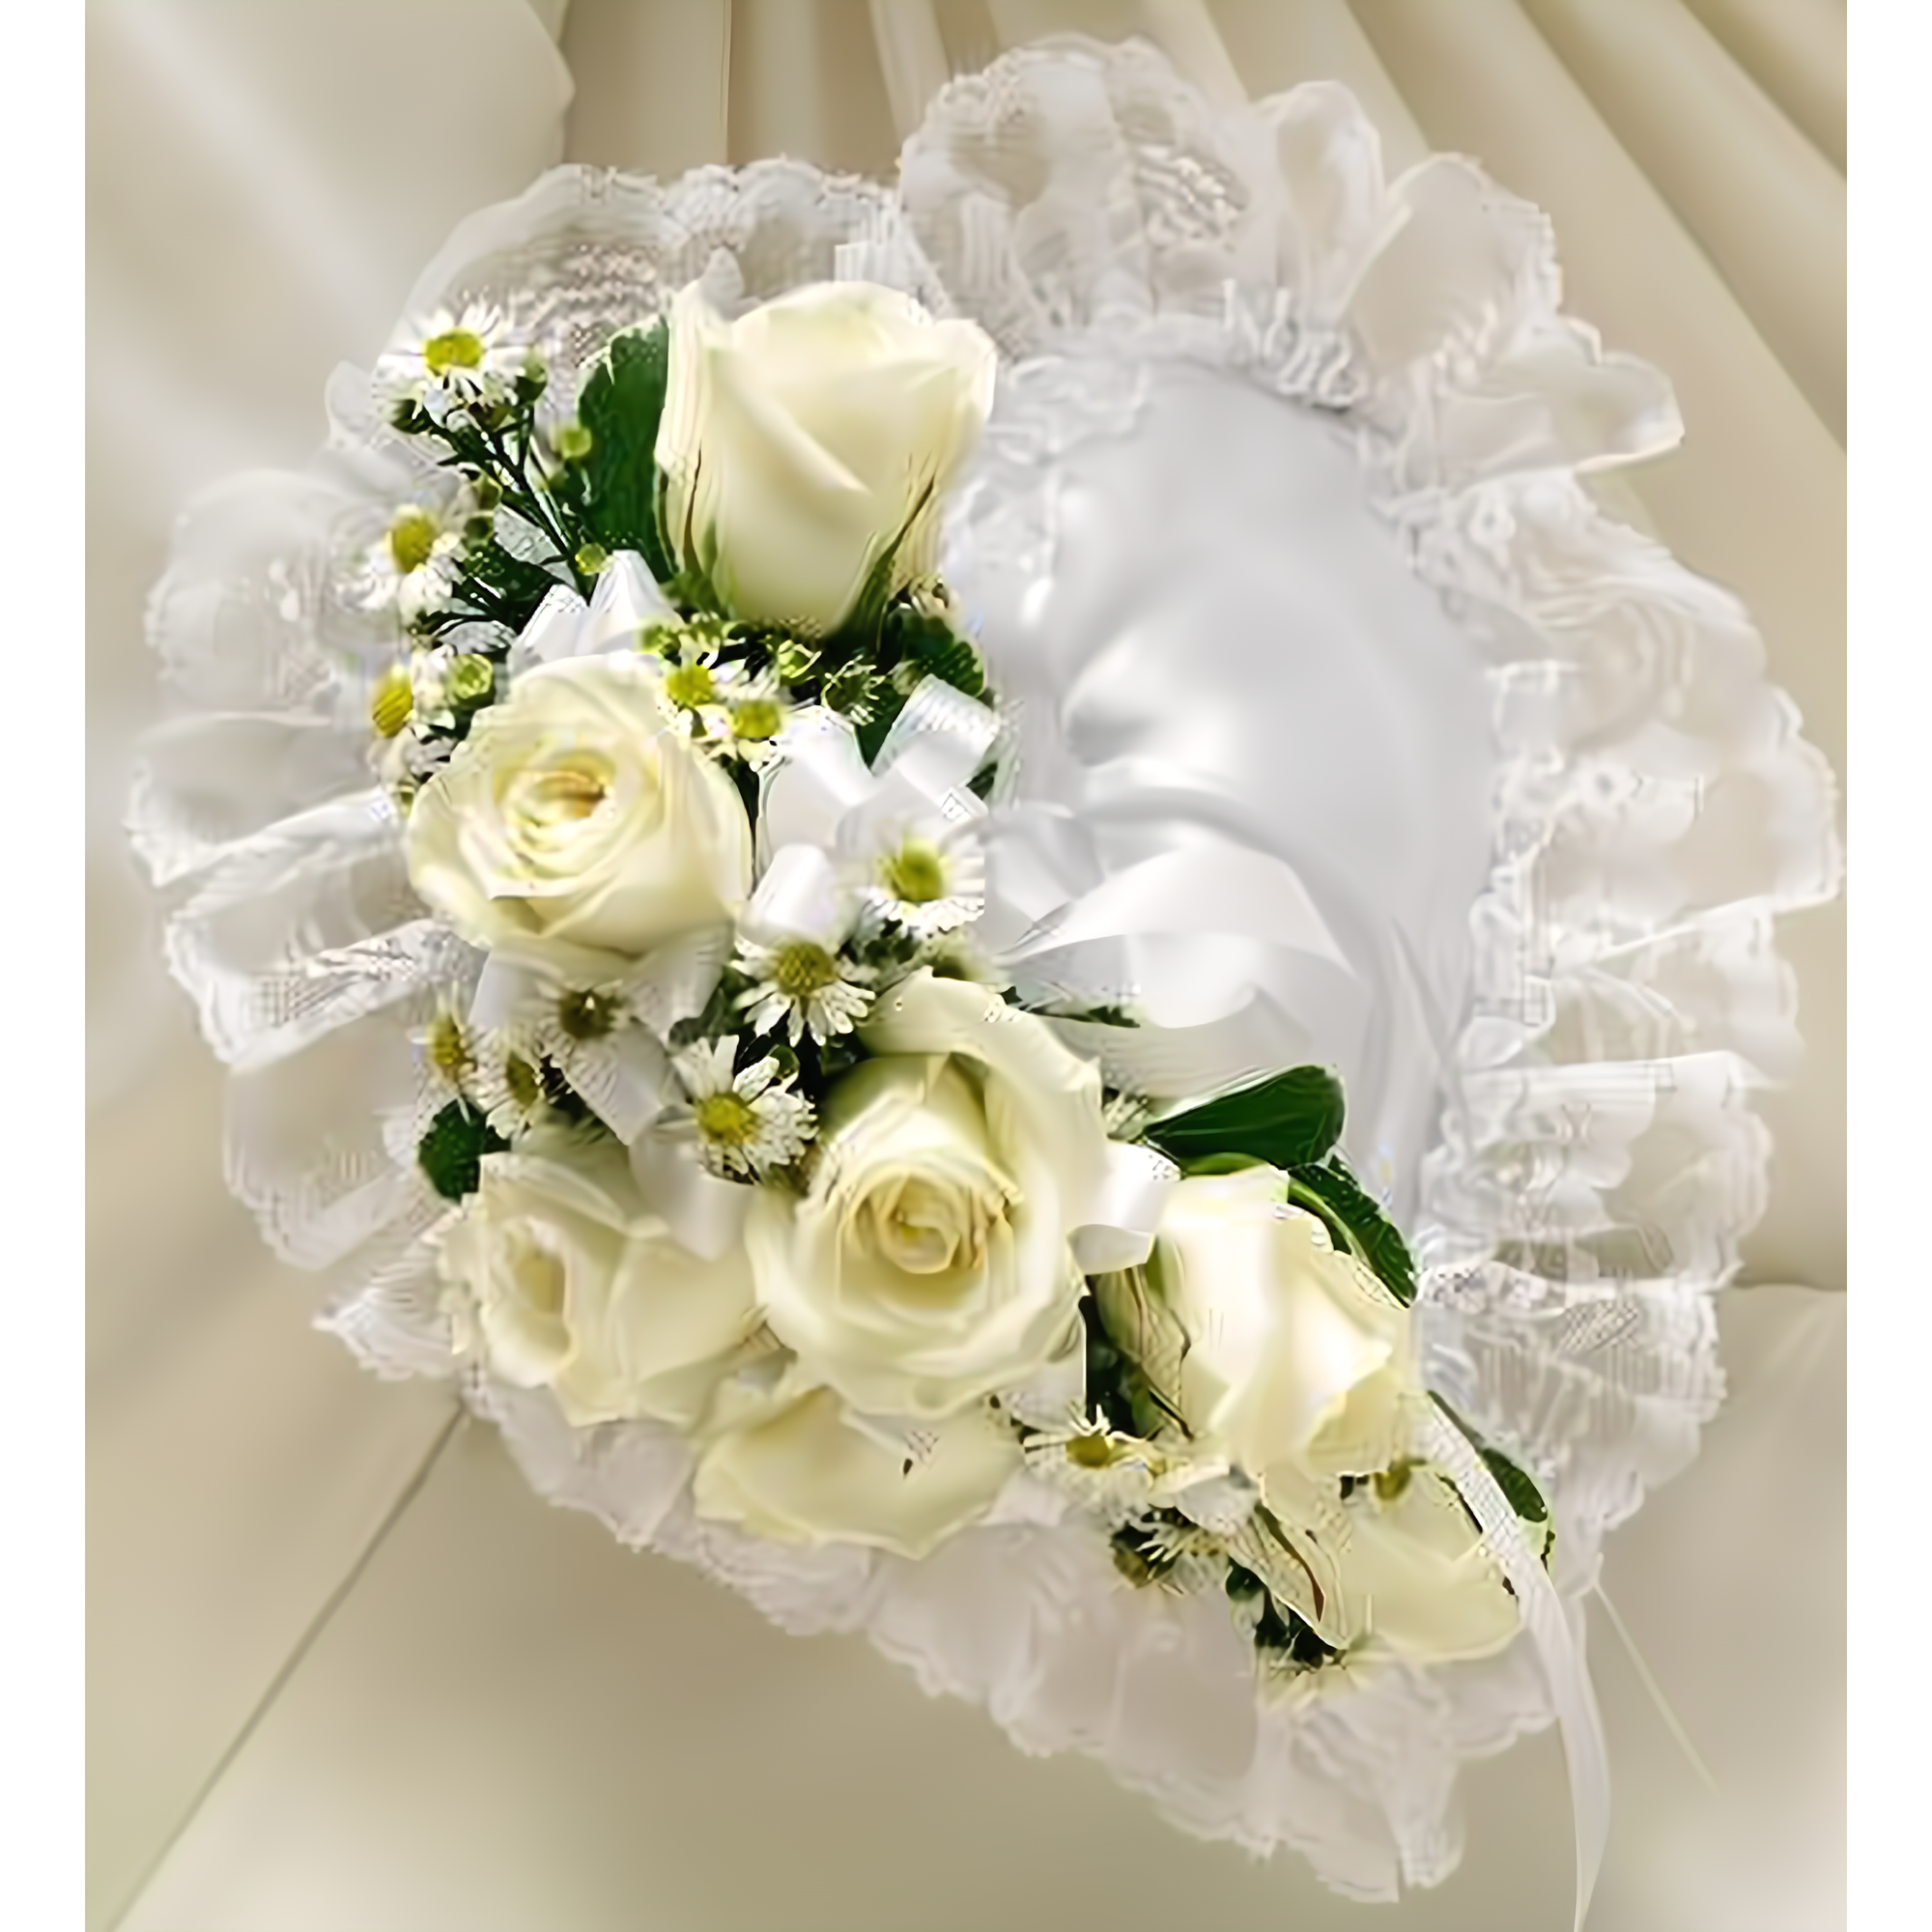 NYC Flower Delivery - White Satin Heart Casket Pillow - Funeral > Casket Sprays